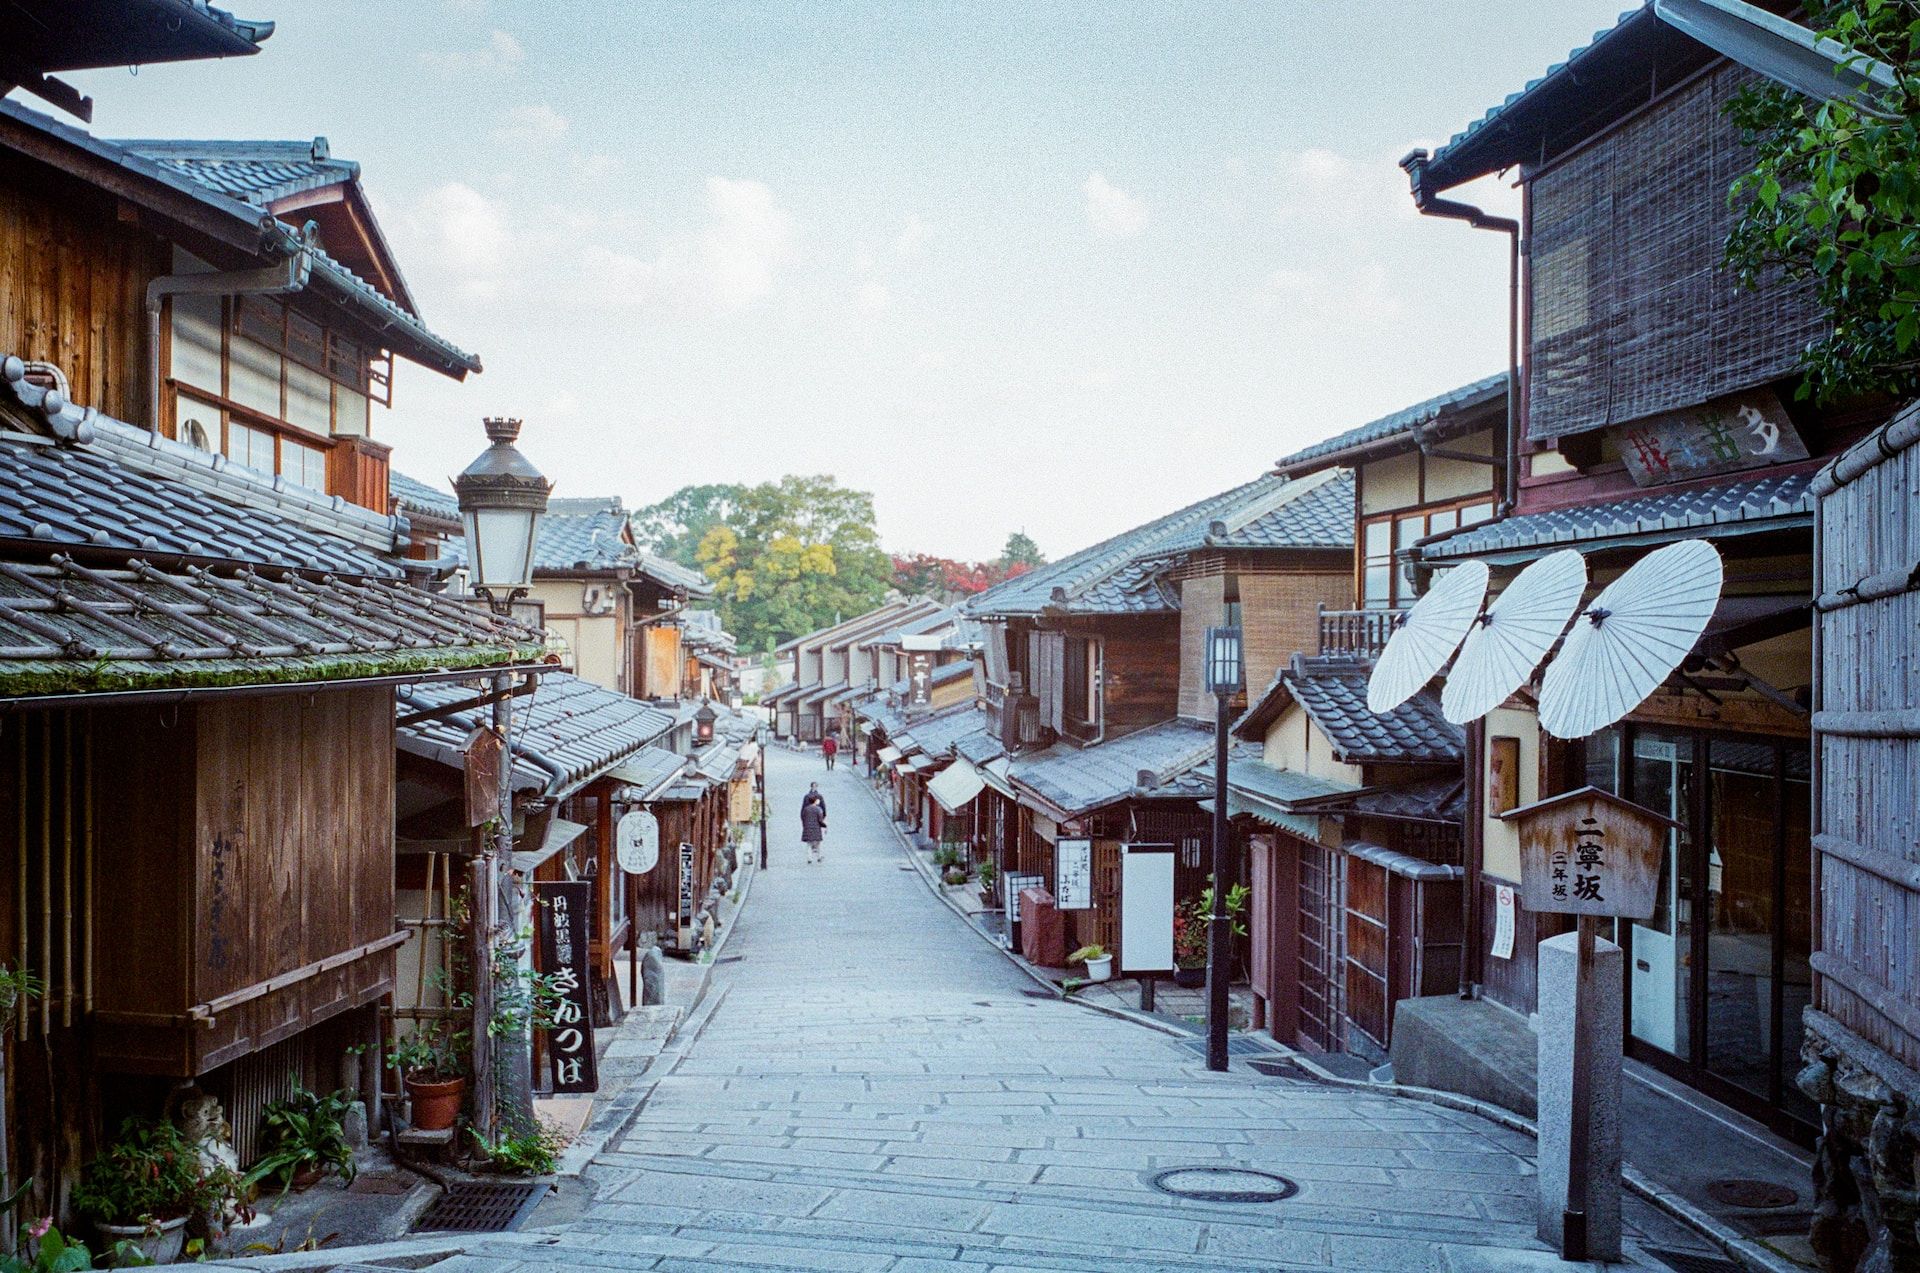 Kyoto, Japan, during the daytime